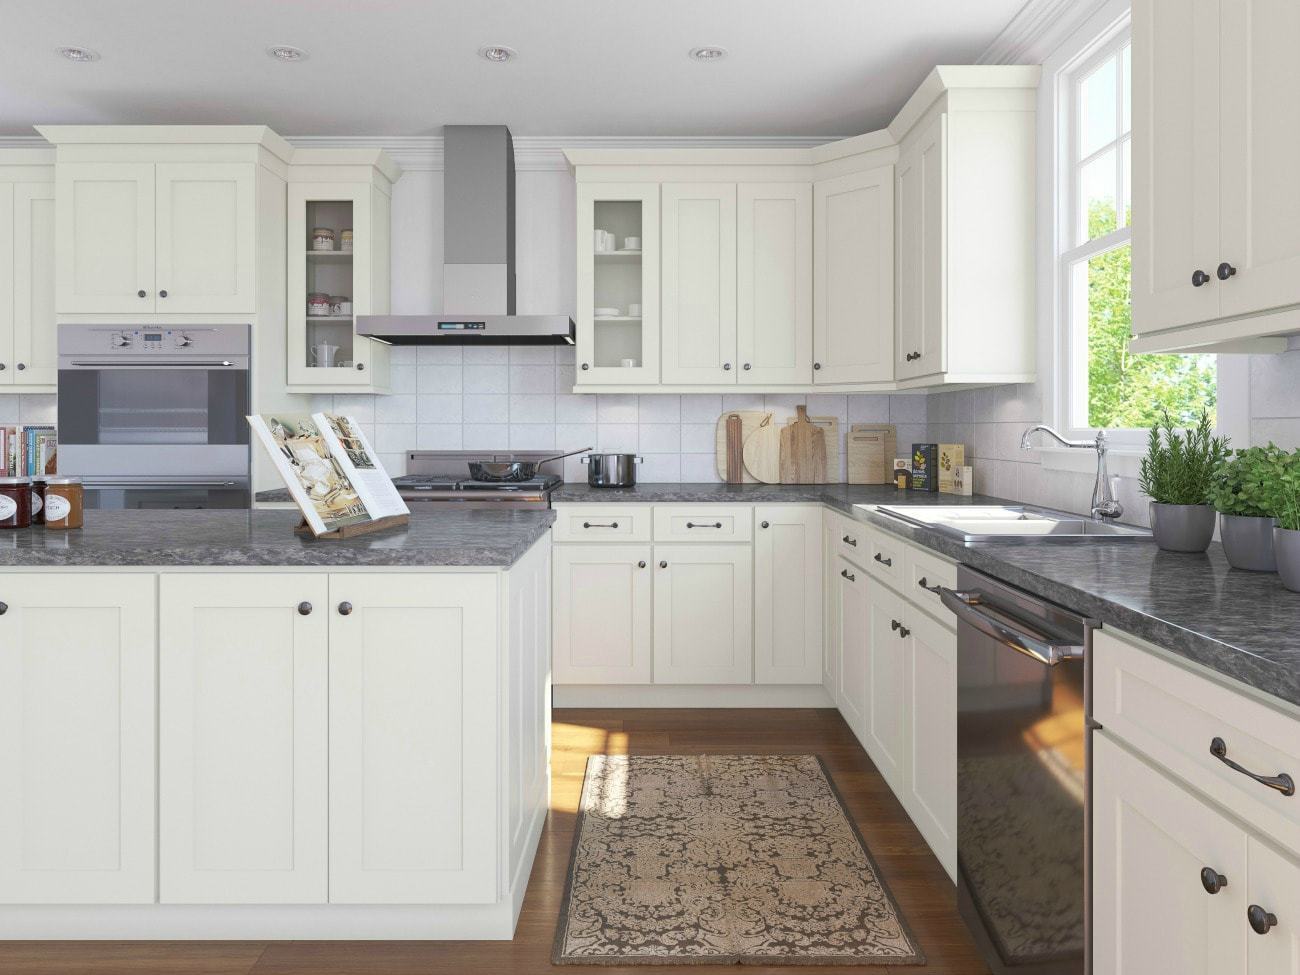 Lighter colored cabinets and accessories can make your kitchen feel brighter and more open.